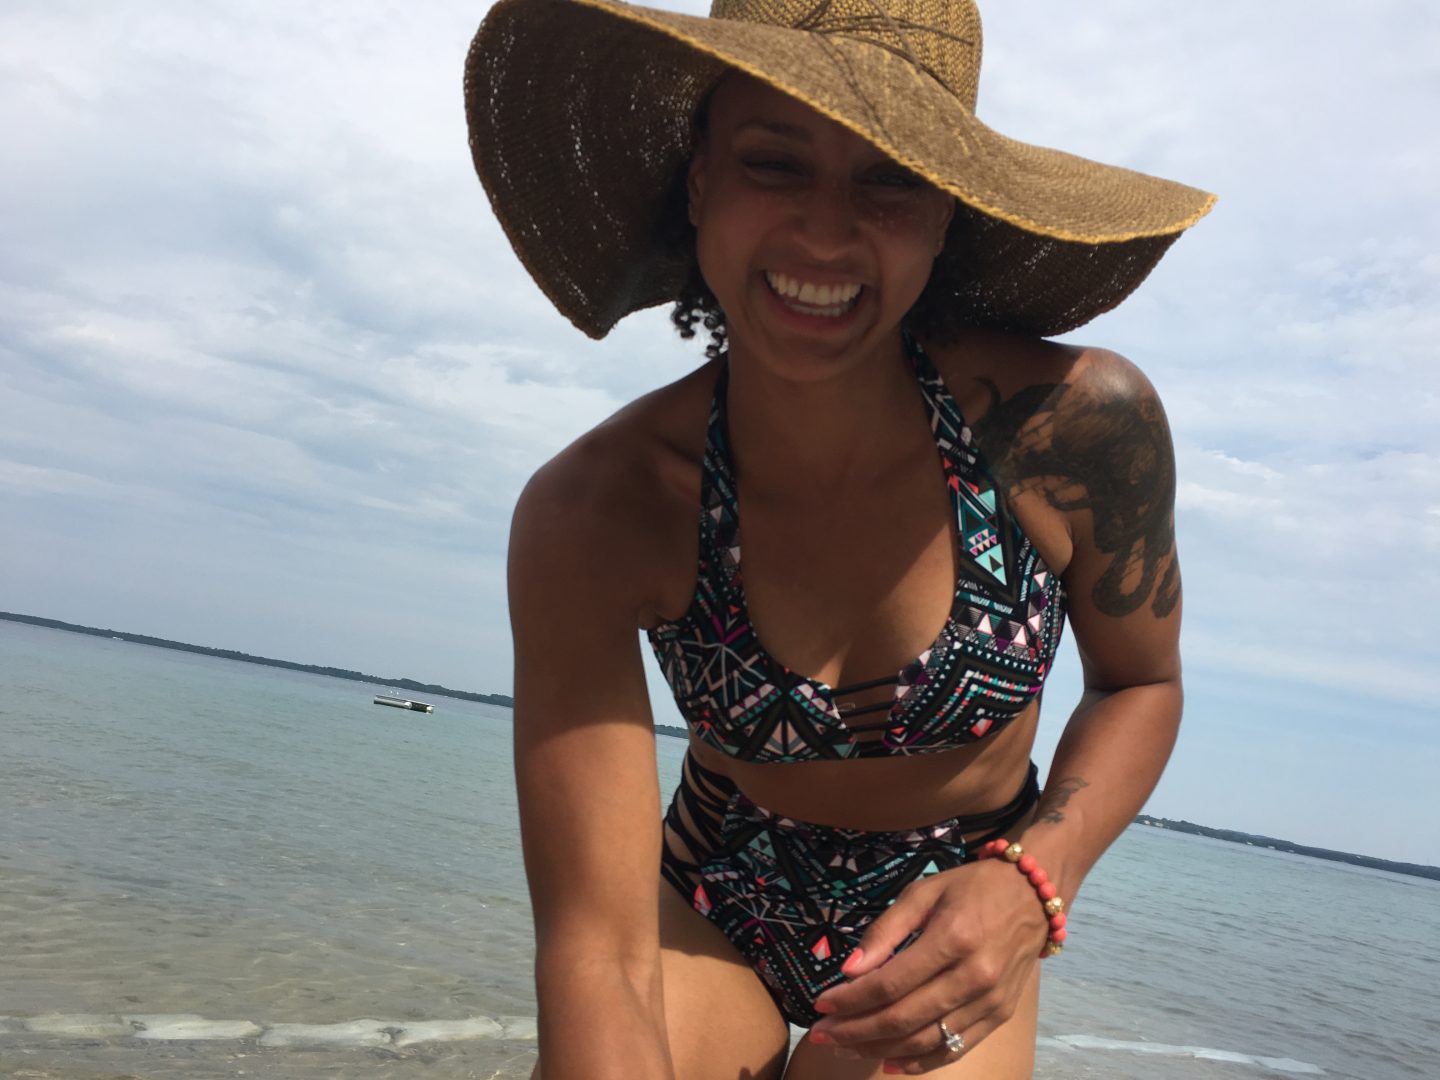 image of a woman at a beach, in a bathing suit and a big floppy hat, smiling at the camera